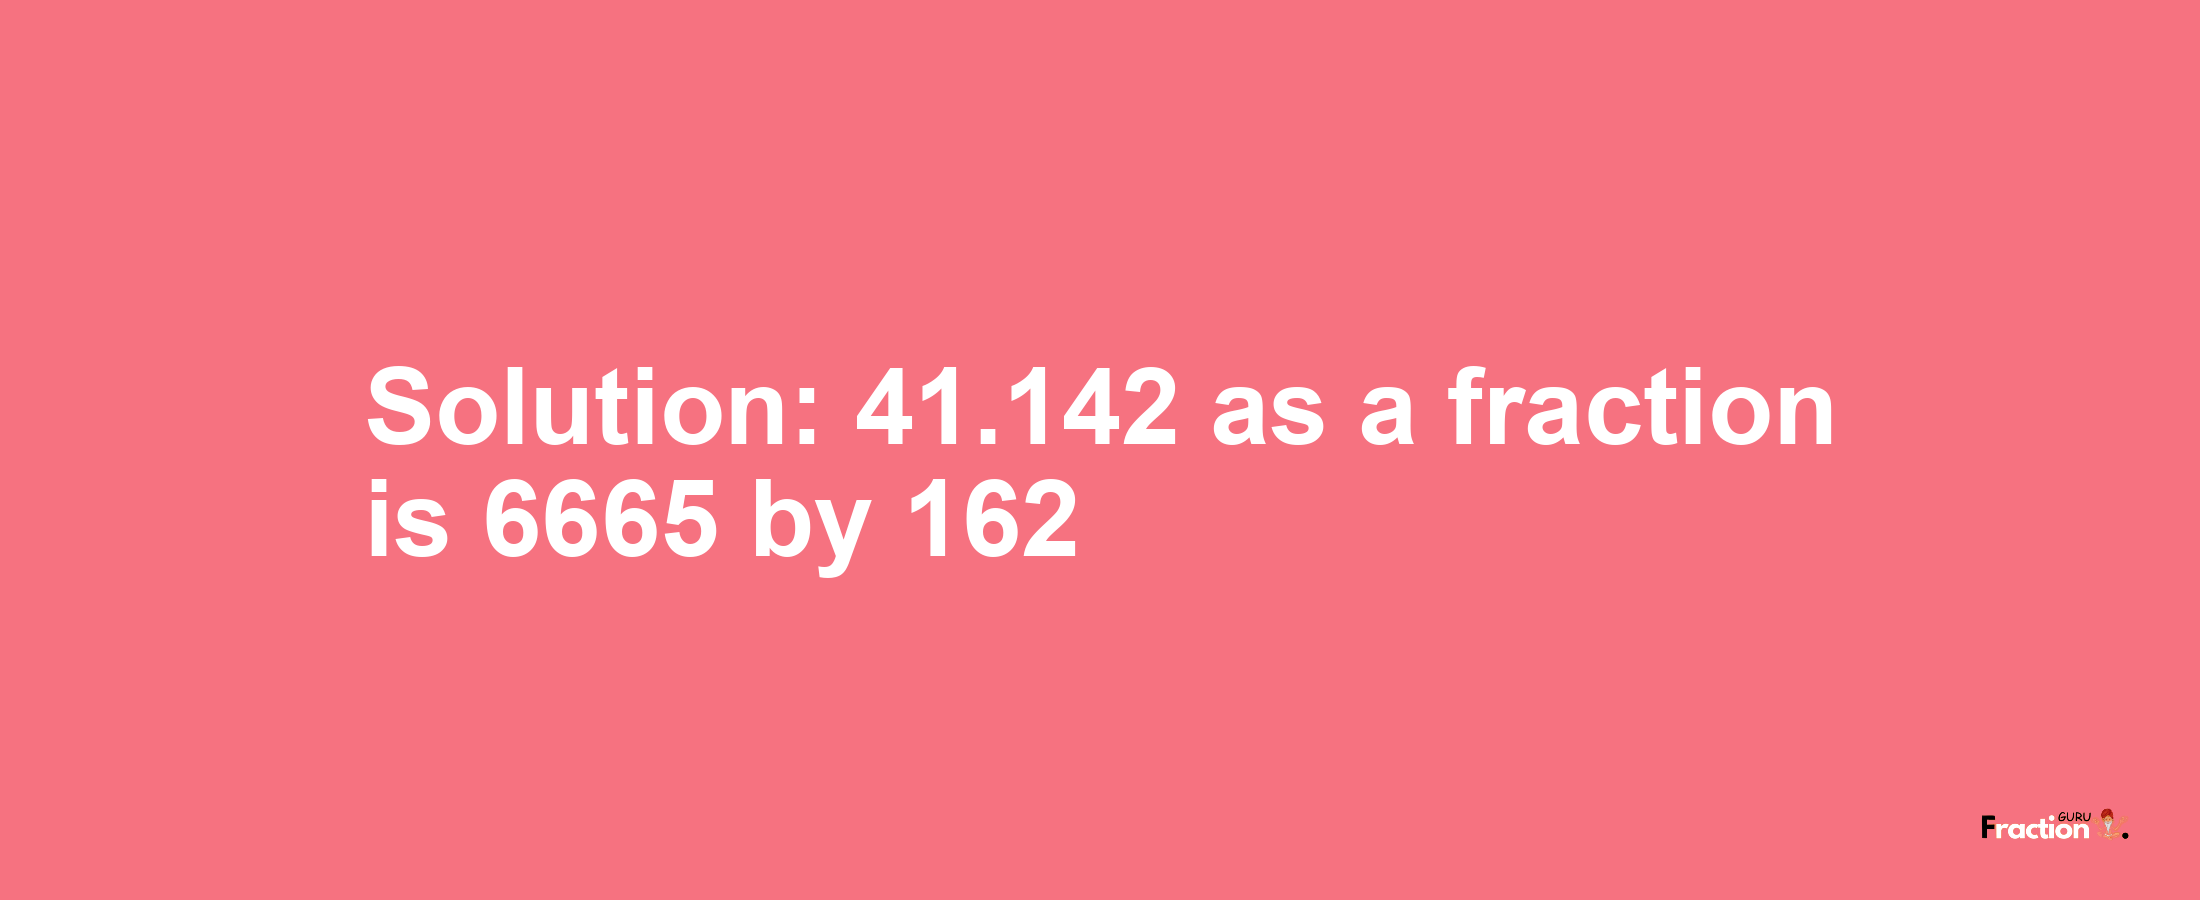 Solution:41.142 as a fraction is 6665/162